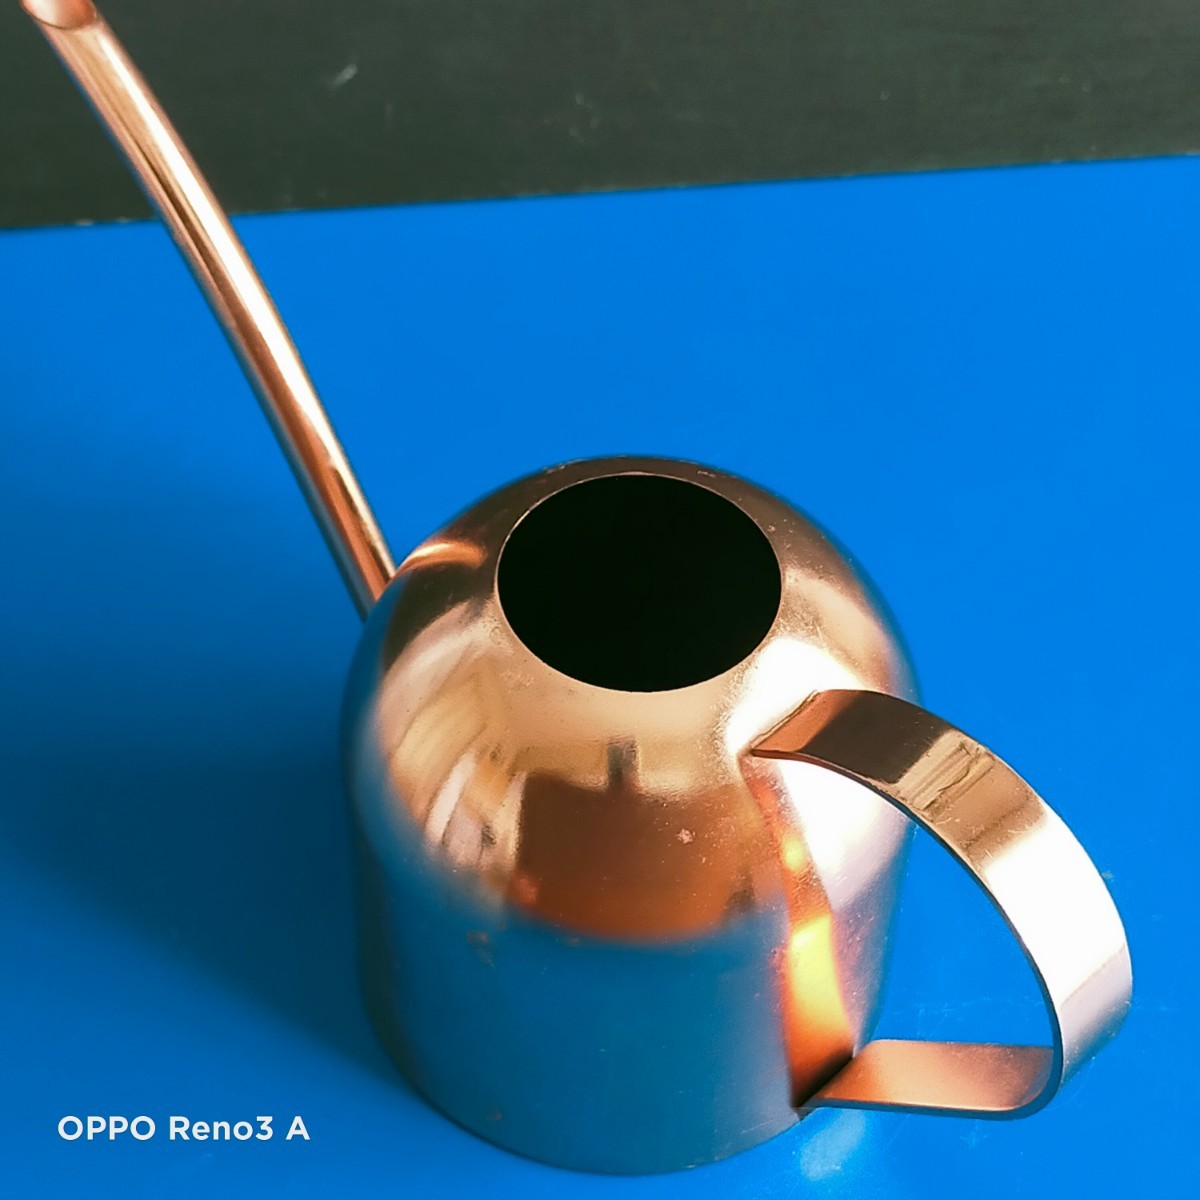  pitcher watering can copper made watering compact gardening decorative plant for full water approximately 450ml